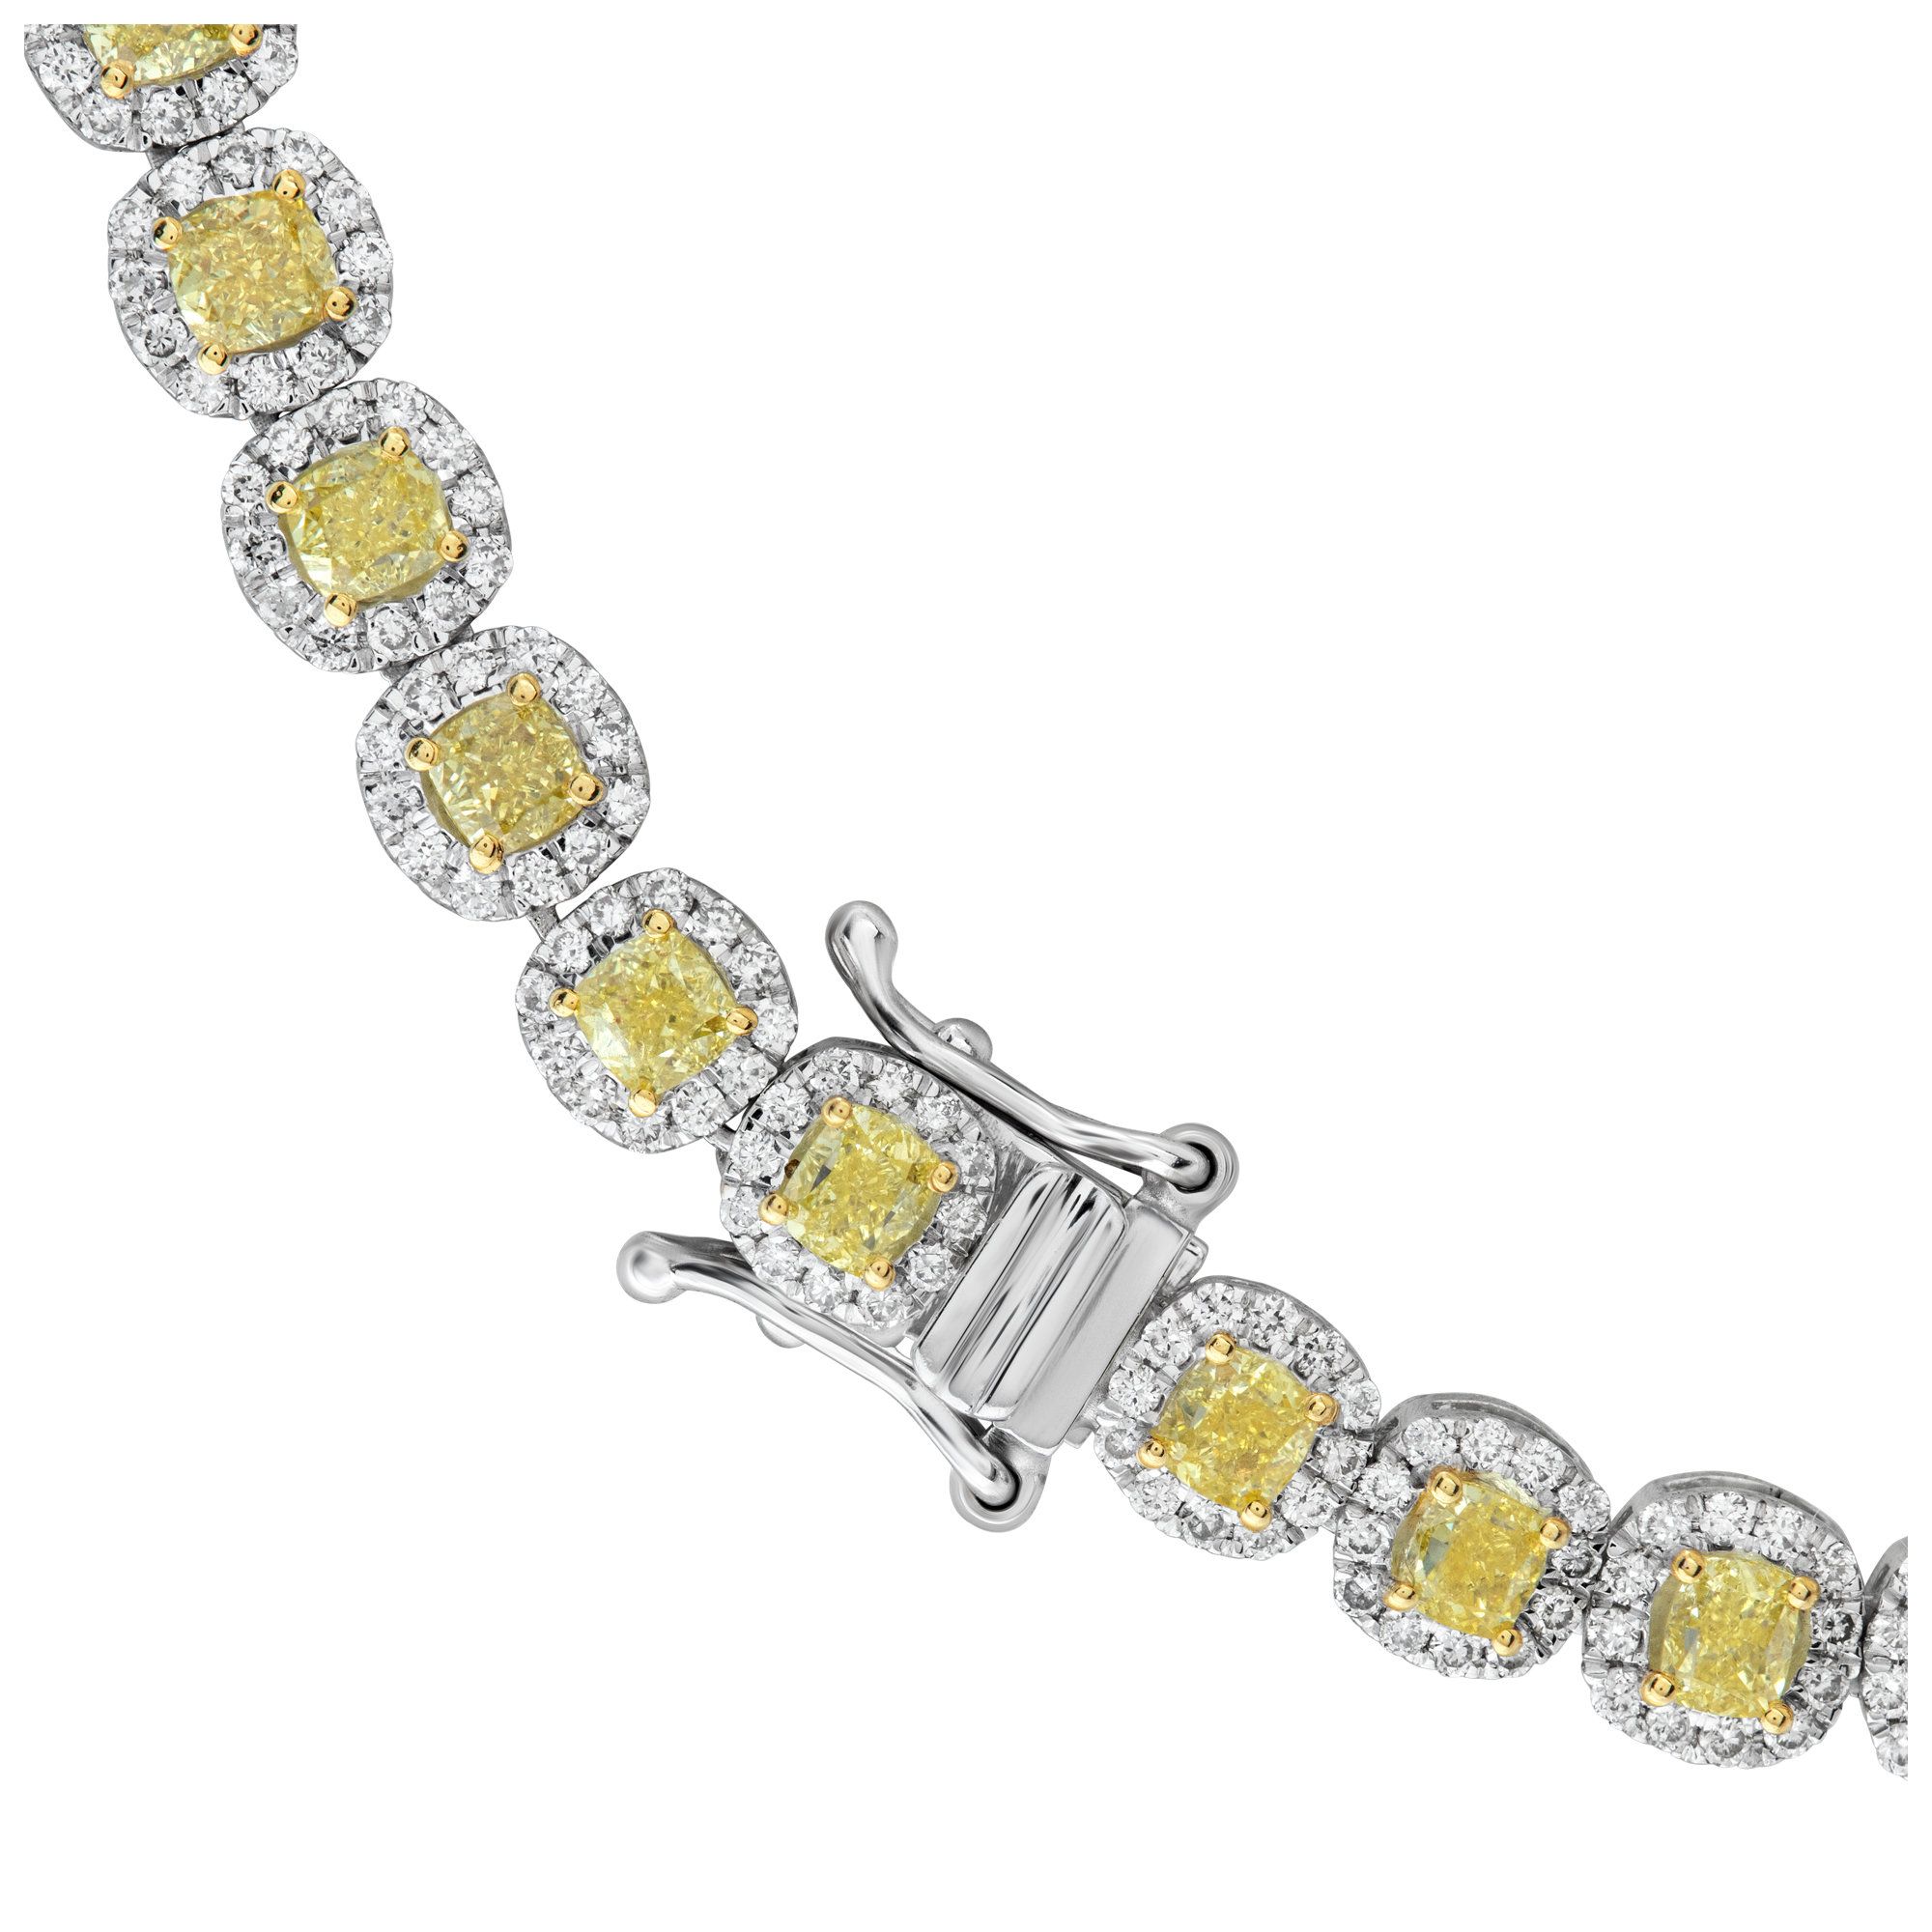 Riviera diamond necklace with GIA certified fancy intense yellow & white diamonds Total approximate weight: 19.07 carats set in 18K yellow & white gold (Stones)